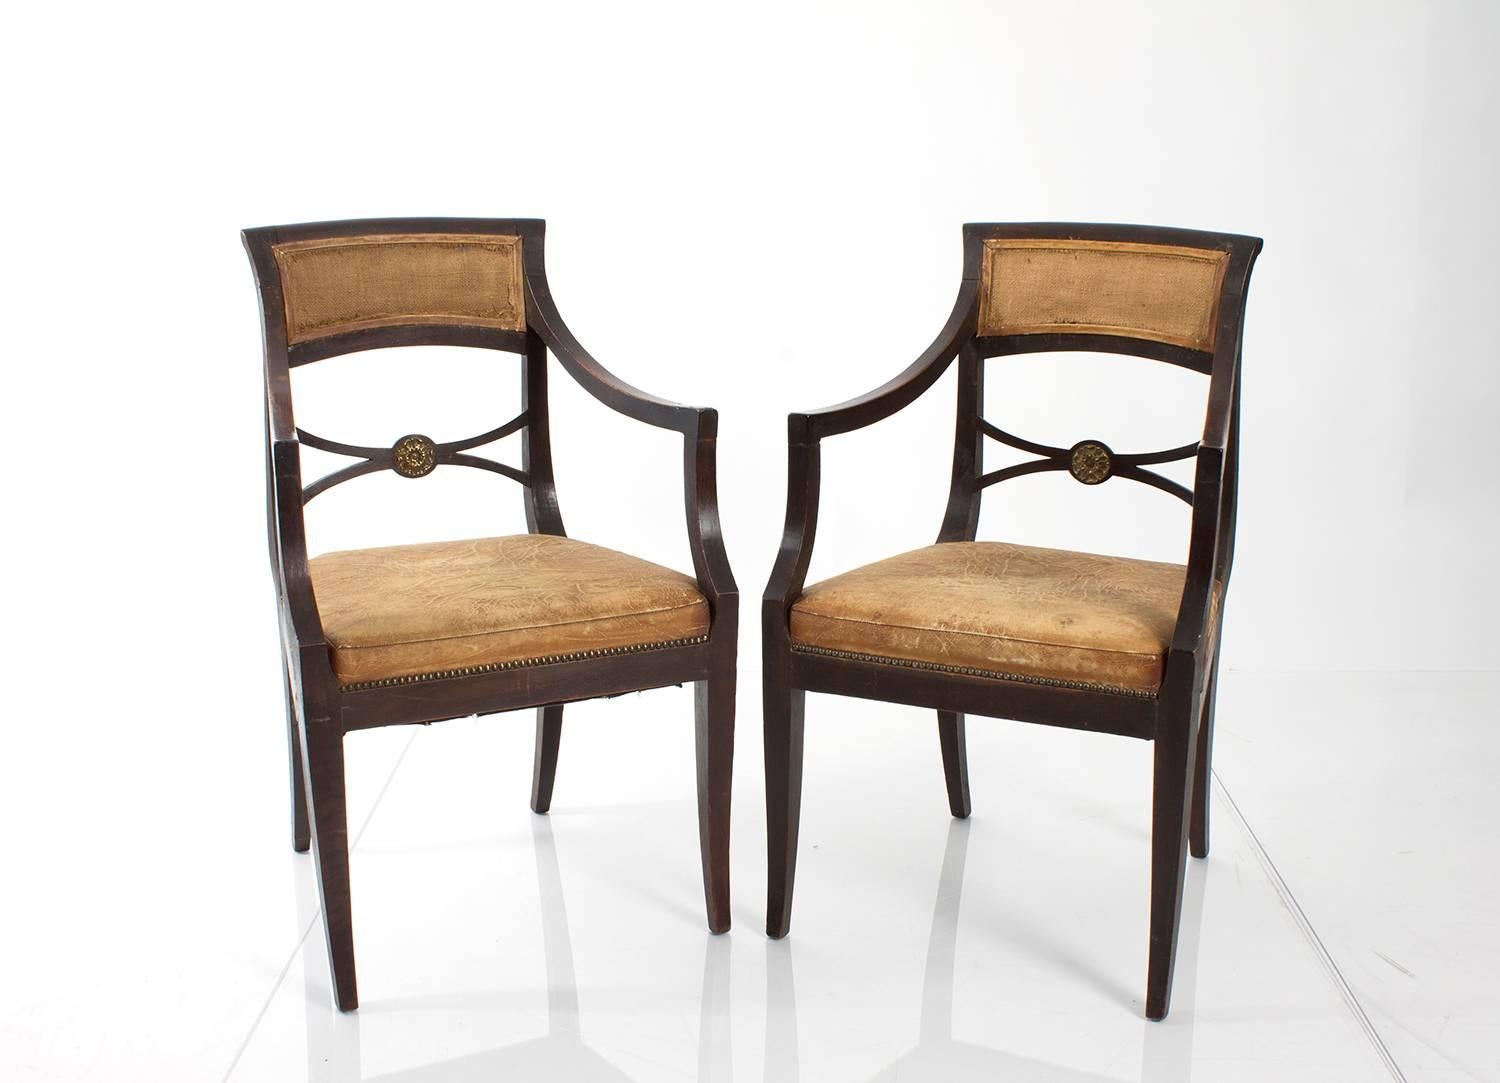 Pair of Regency style armchairs upholstered in distressed leather and burlap.